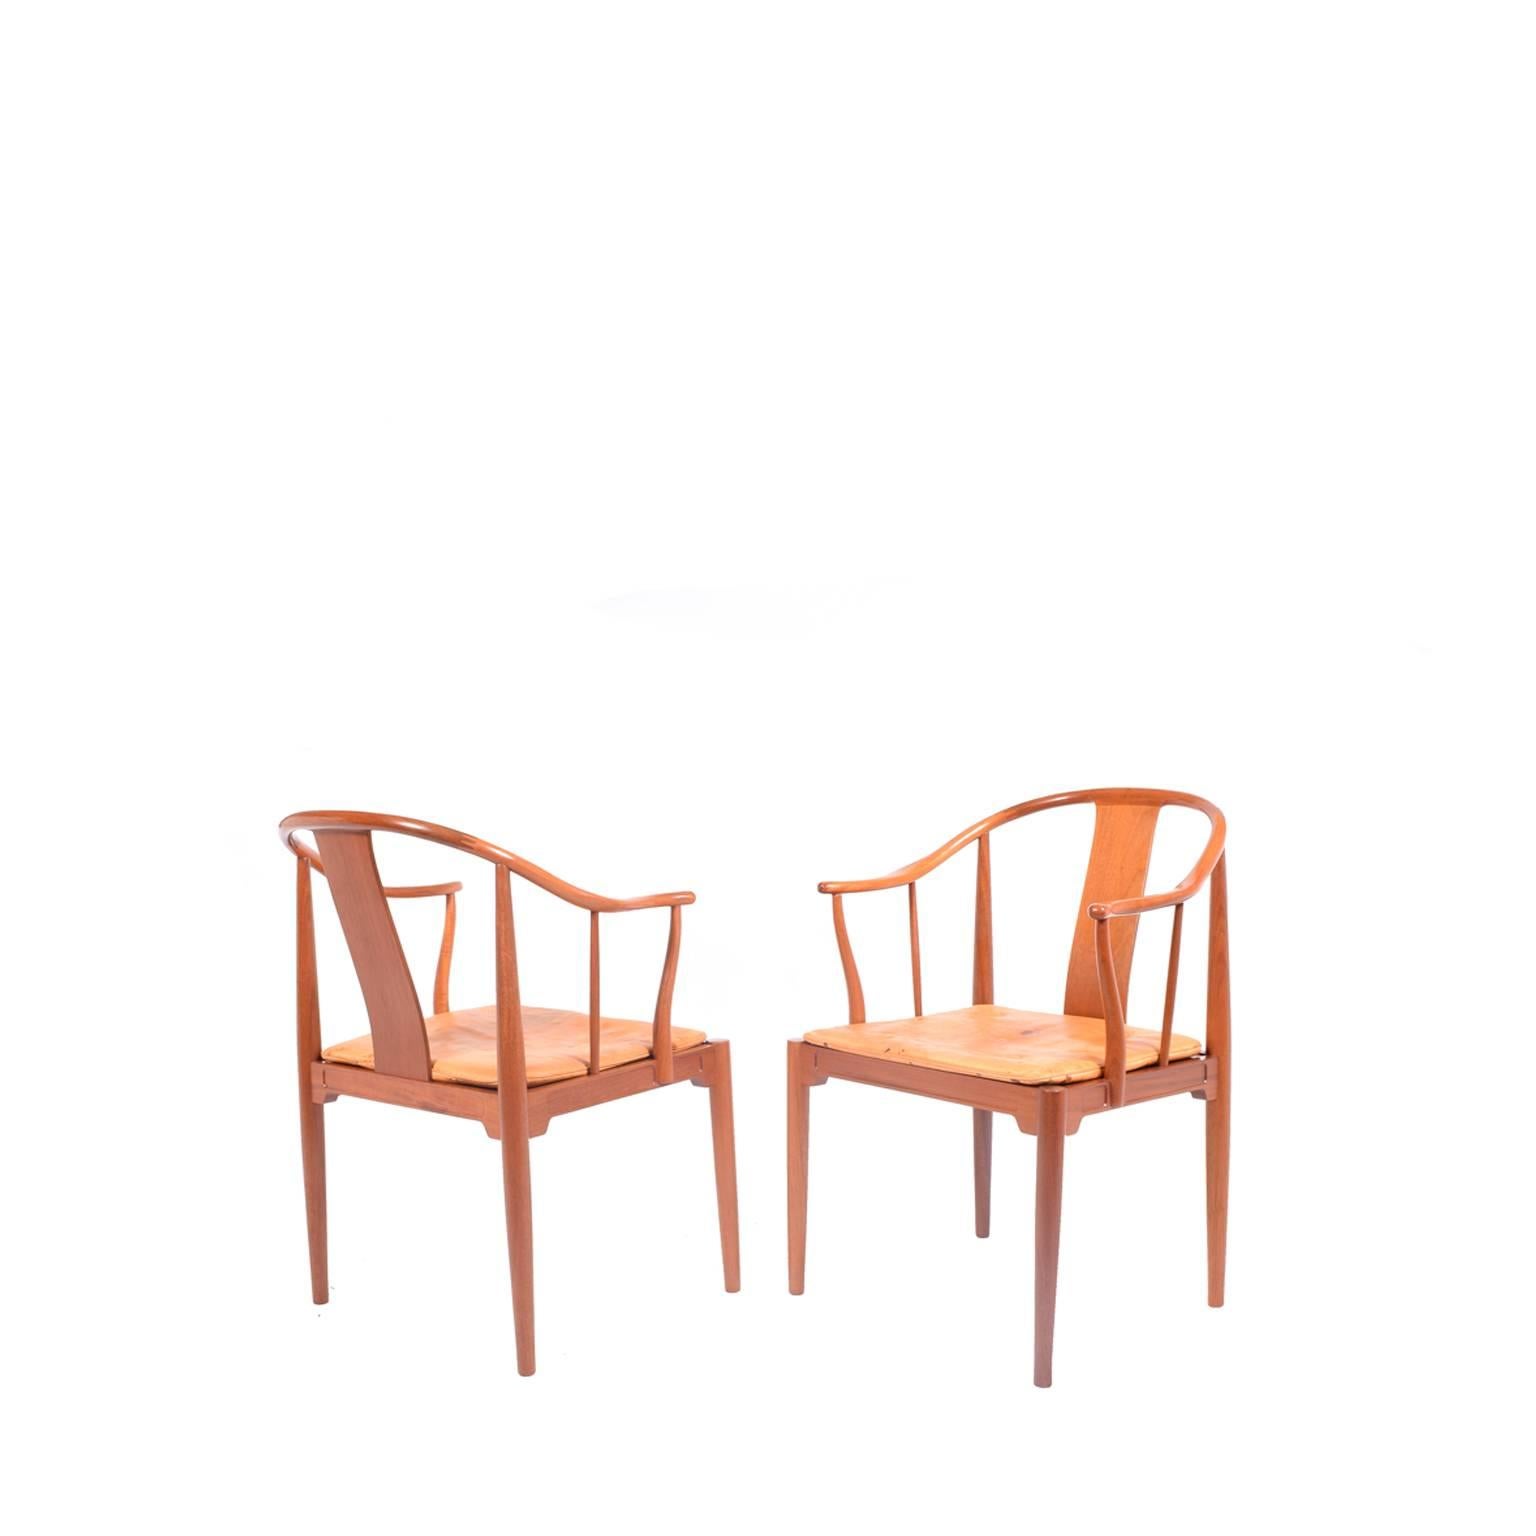 Solid mahogany armchairs with natural leather cushions designed by Hans Wegner for Fritz Hansen in 1944. Inspiration came from a 1400 Chinese chair he saw in a museum.